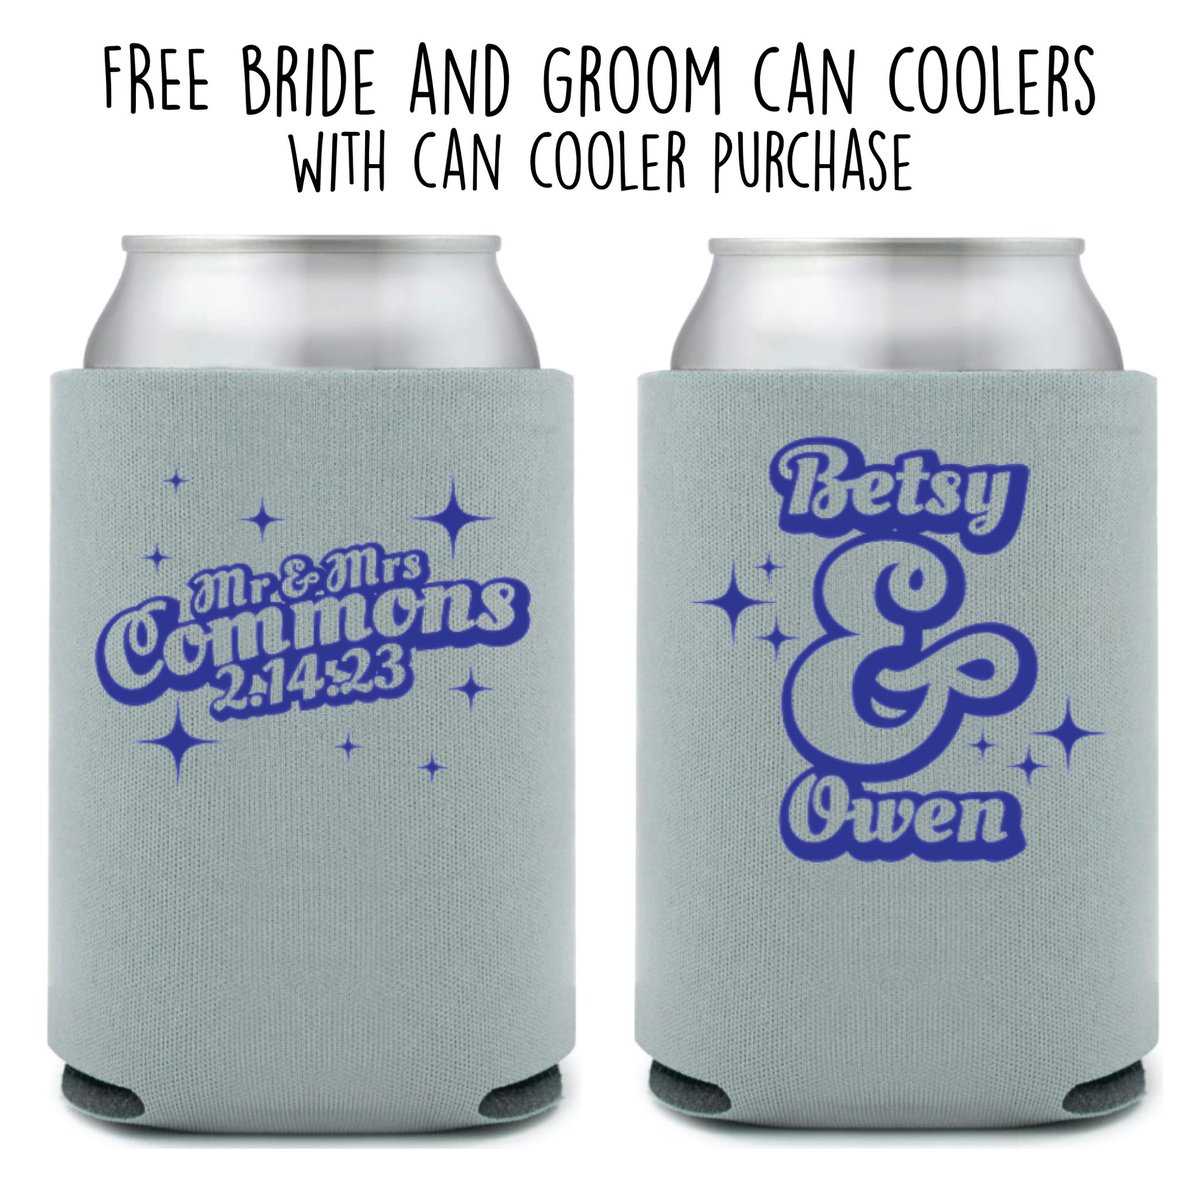 Planning a retro-themed wedding? Our custom can coozies add a touch of nostalgia to your special day! Personalize with your names and wedding date for a unique keepsake your guests will love! 
#weddingpartyfavors #engaged2023 #partyfavor #retroparty